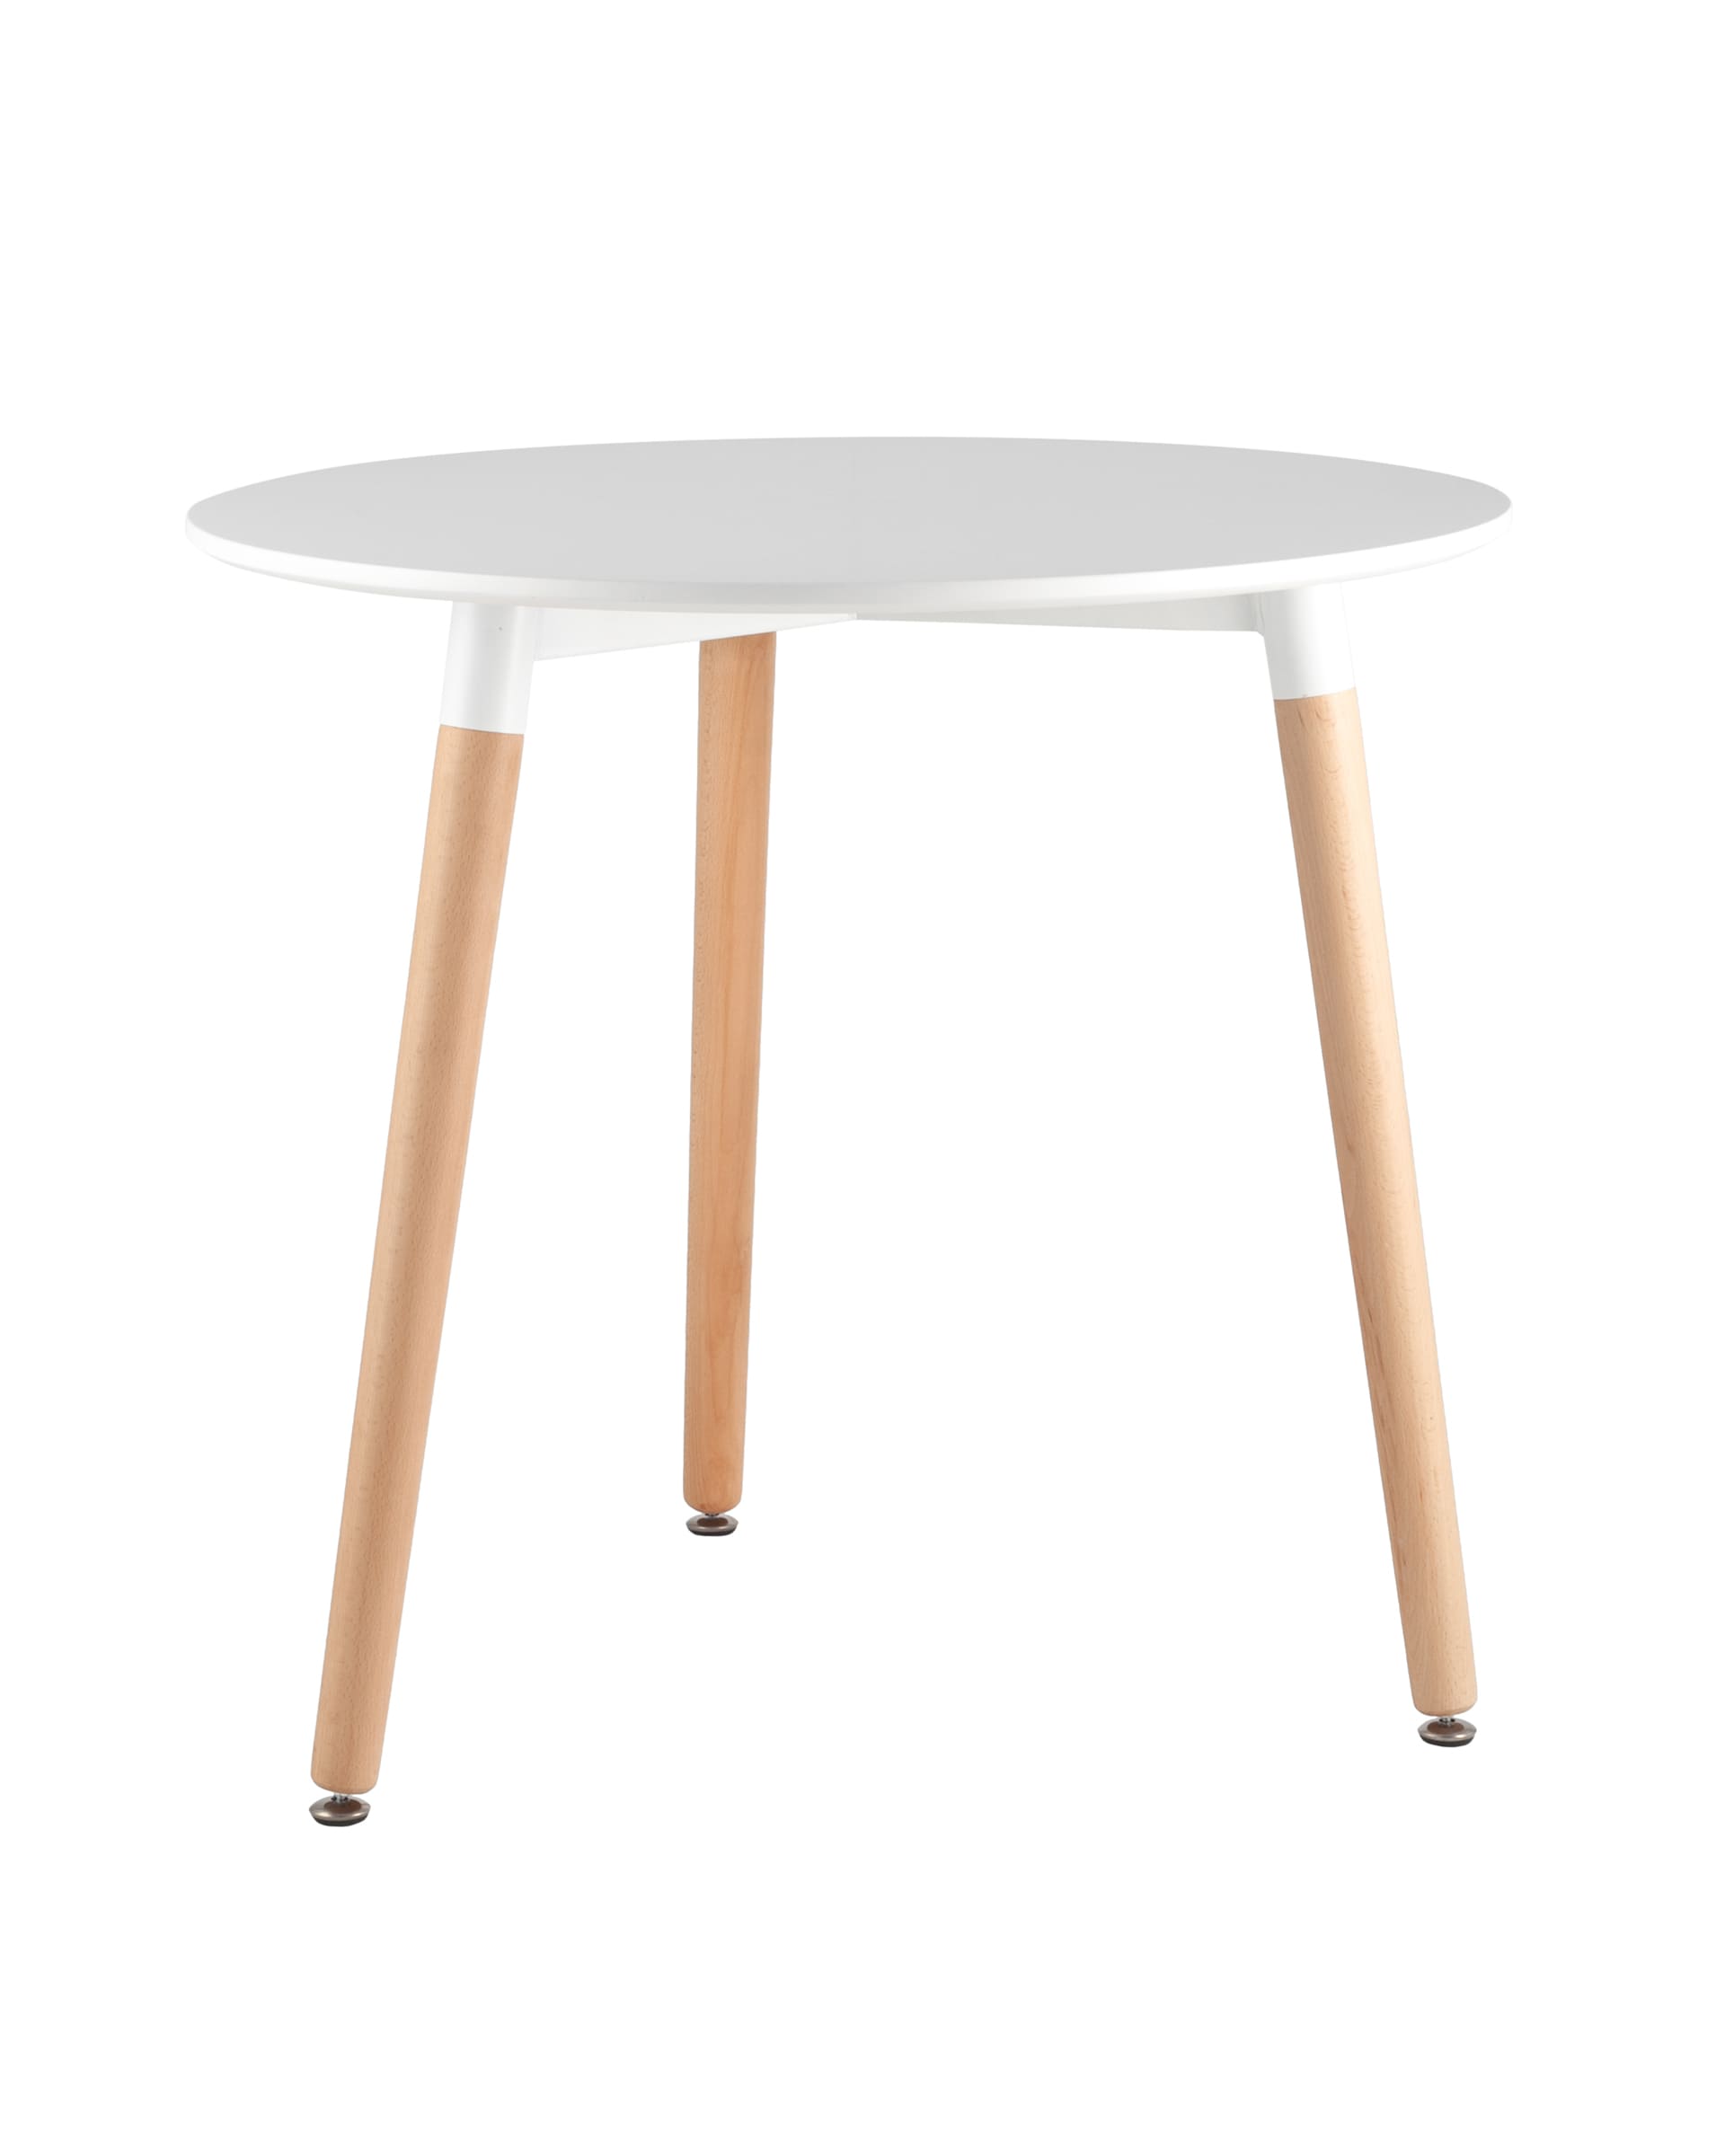   Stool Group DST 000000424